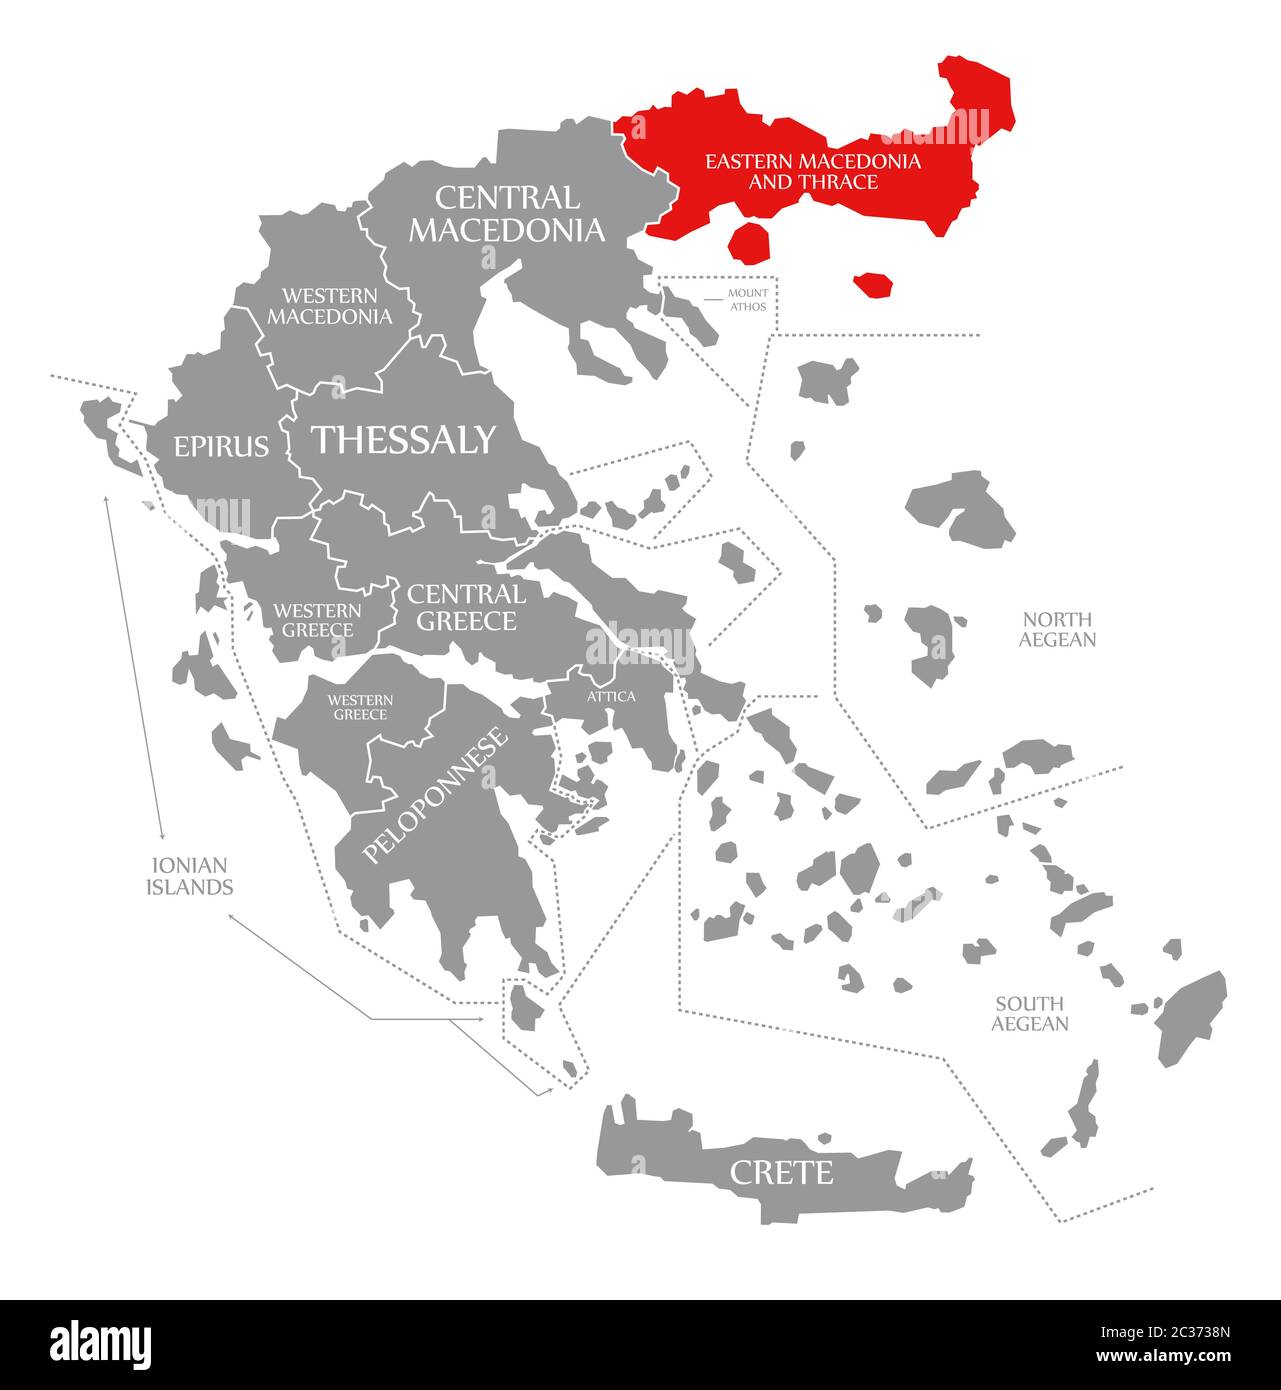 Eastern Macedonia and Thrace red highlighted in map of Greece Stock Photo